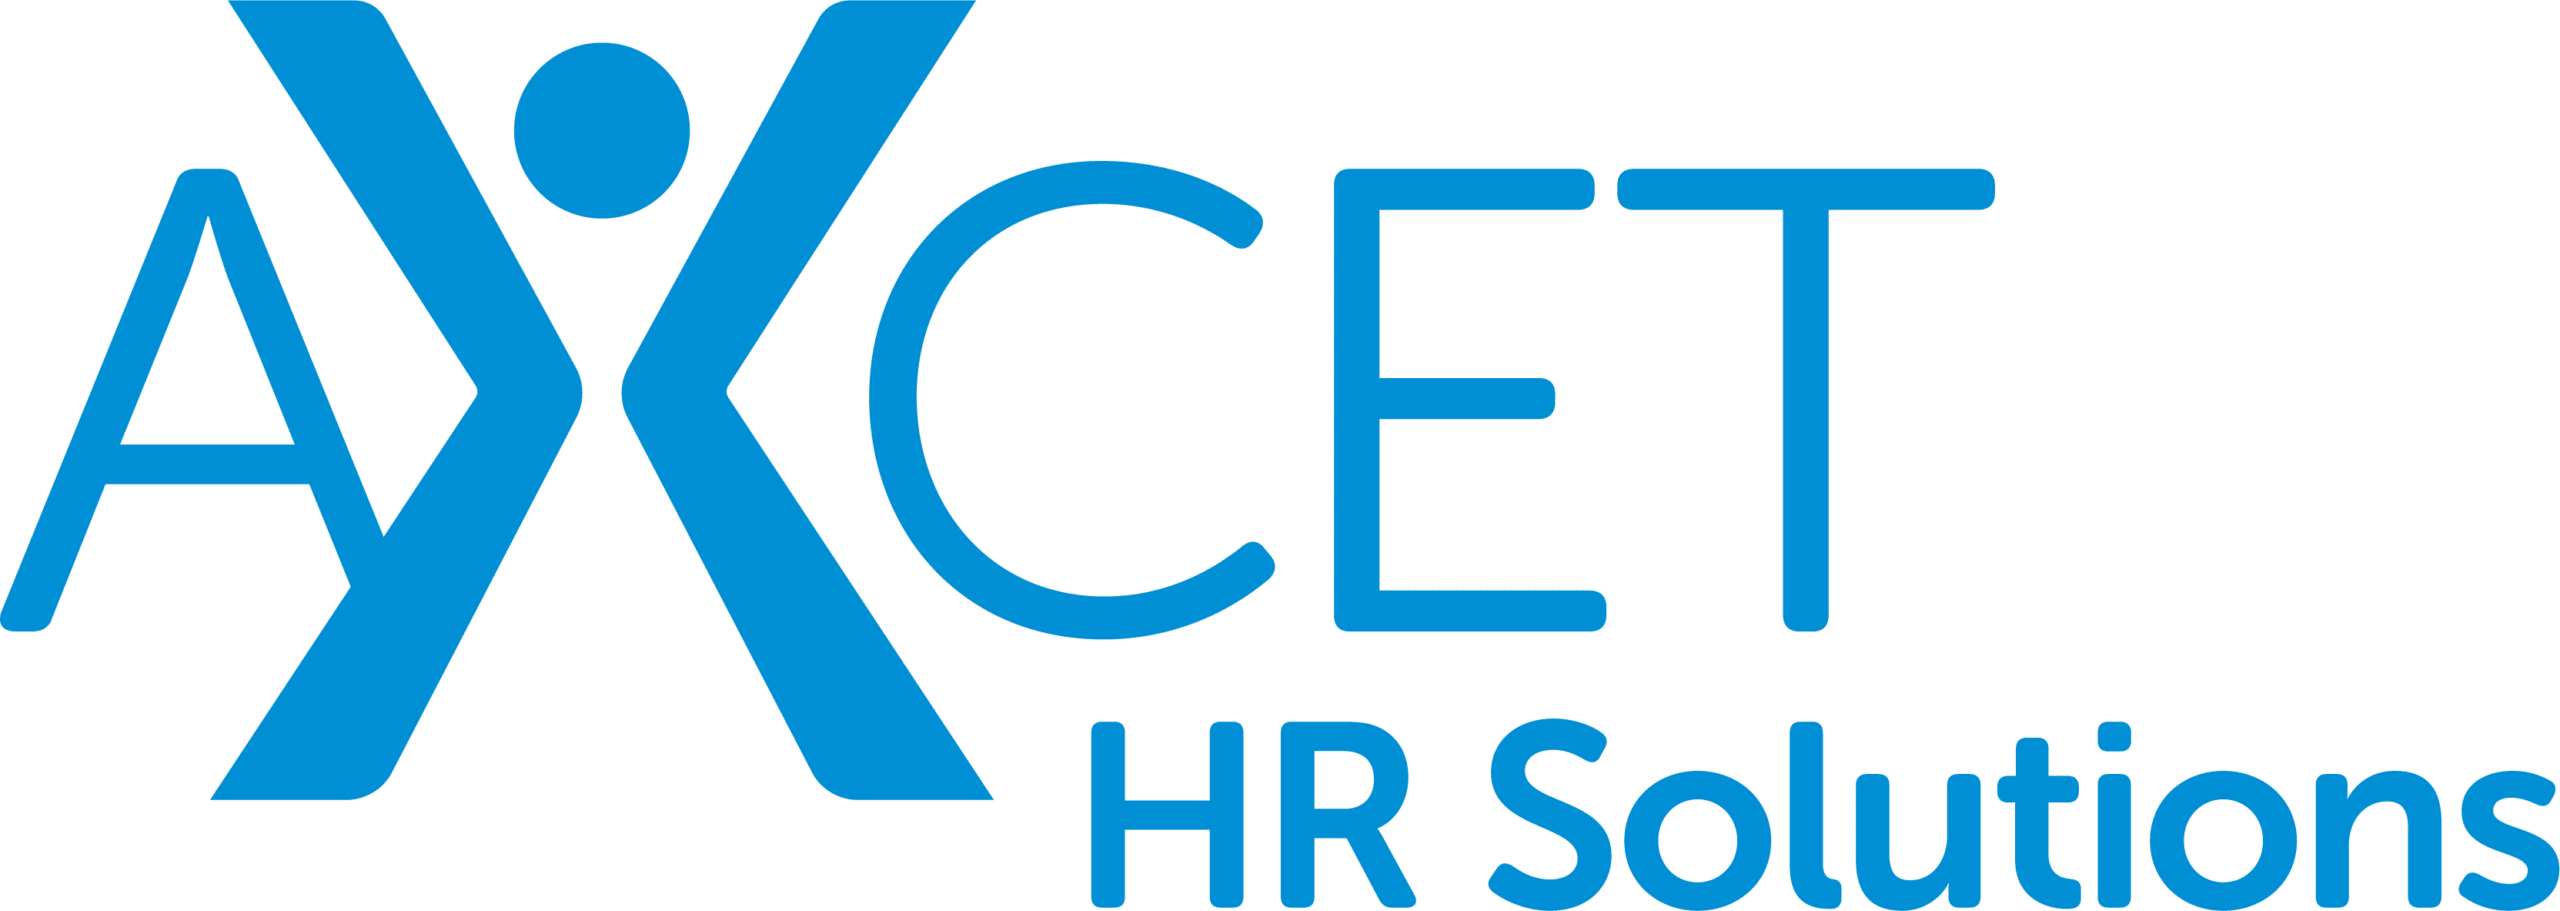 Axcet HR Solutions